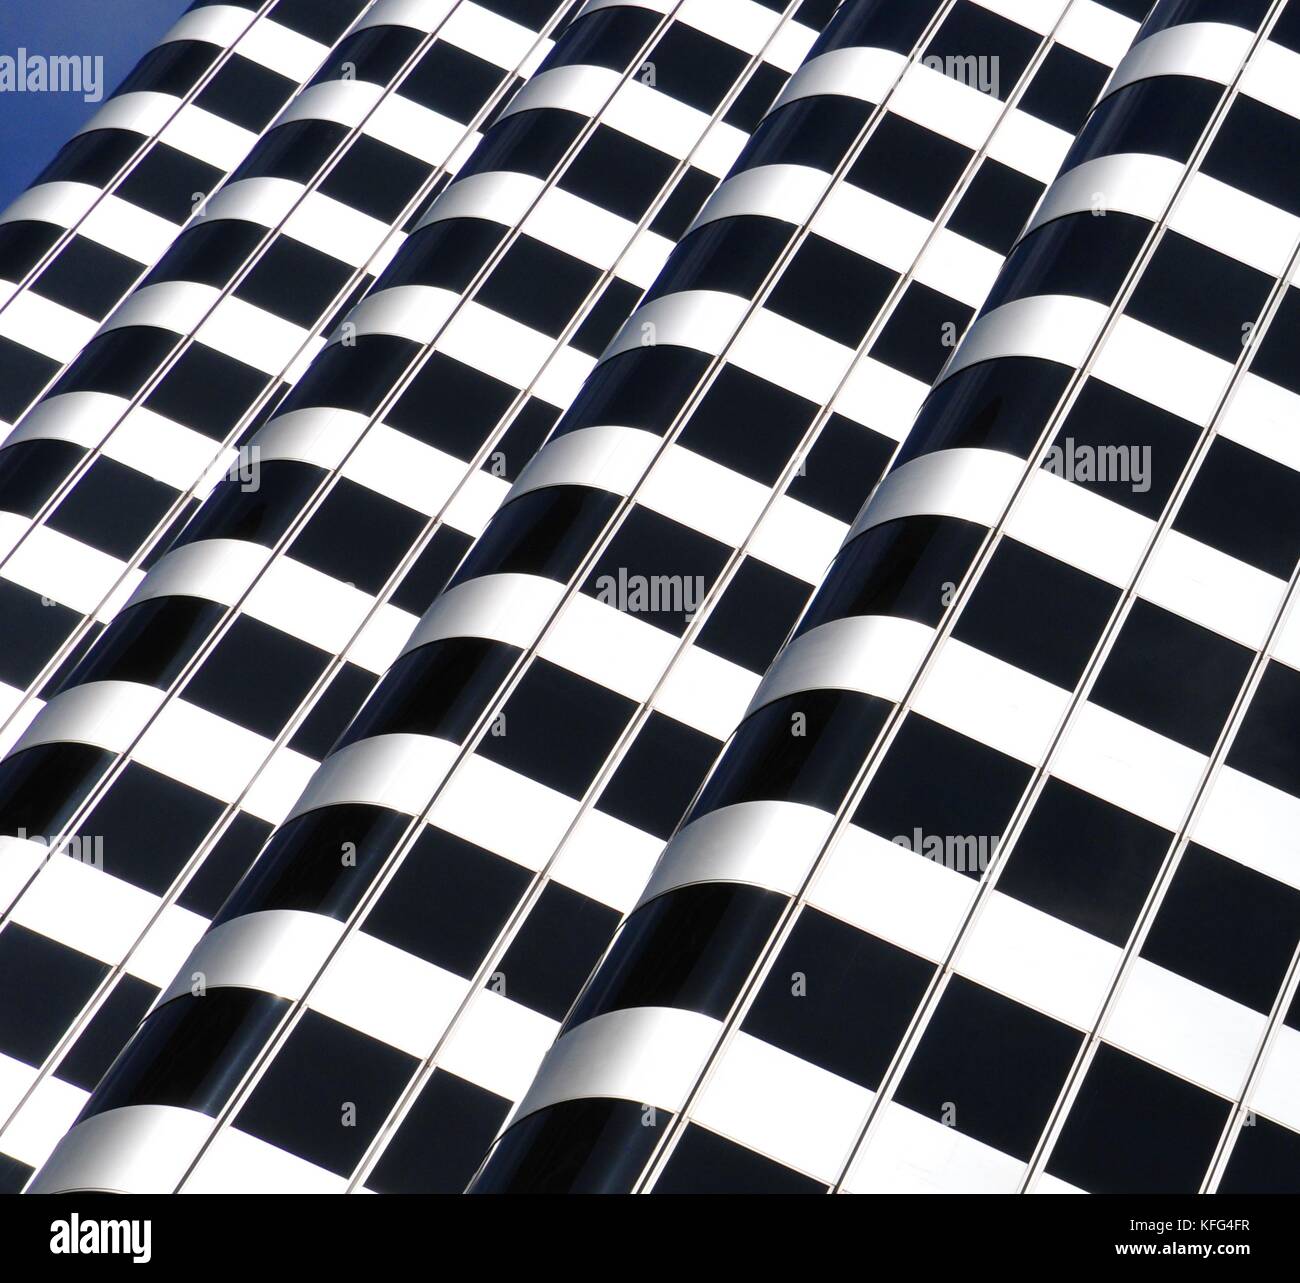 Abstract buildings in San Francisco artistically captured representing black and while zebra pattern or cross walk. Stock Photo